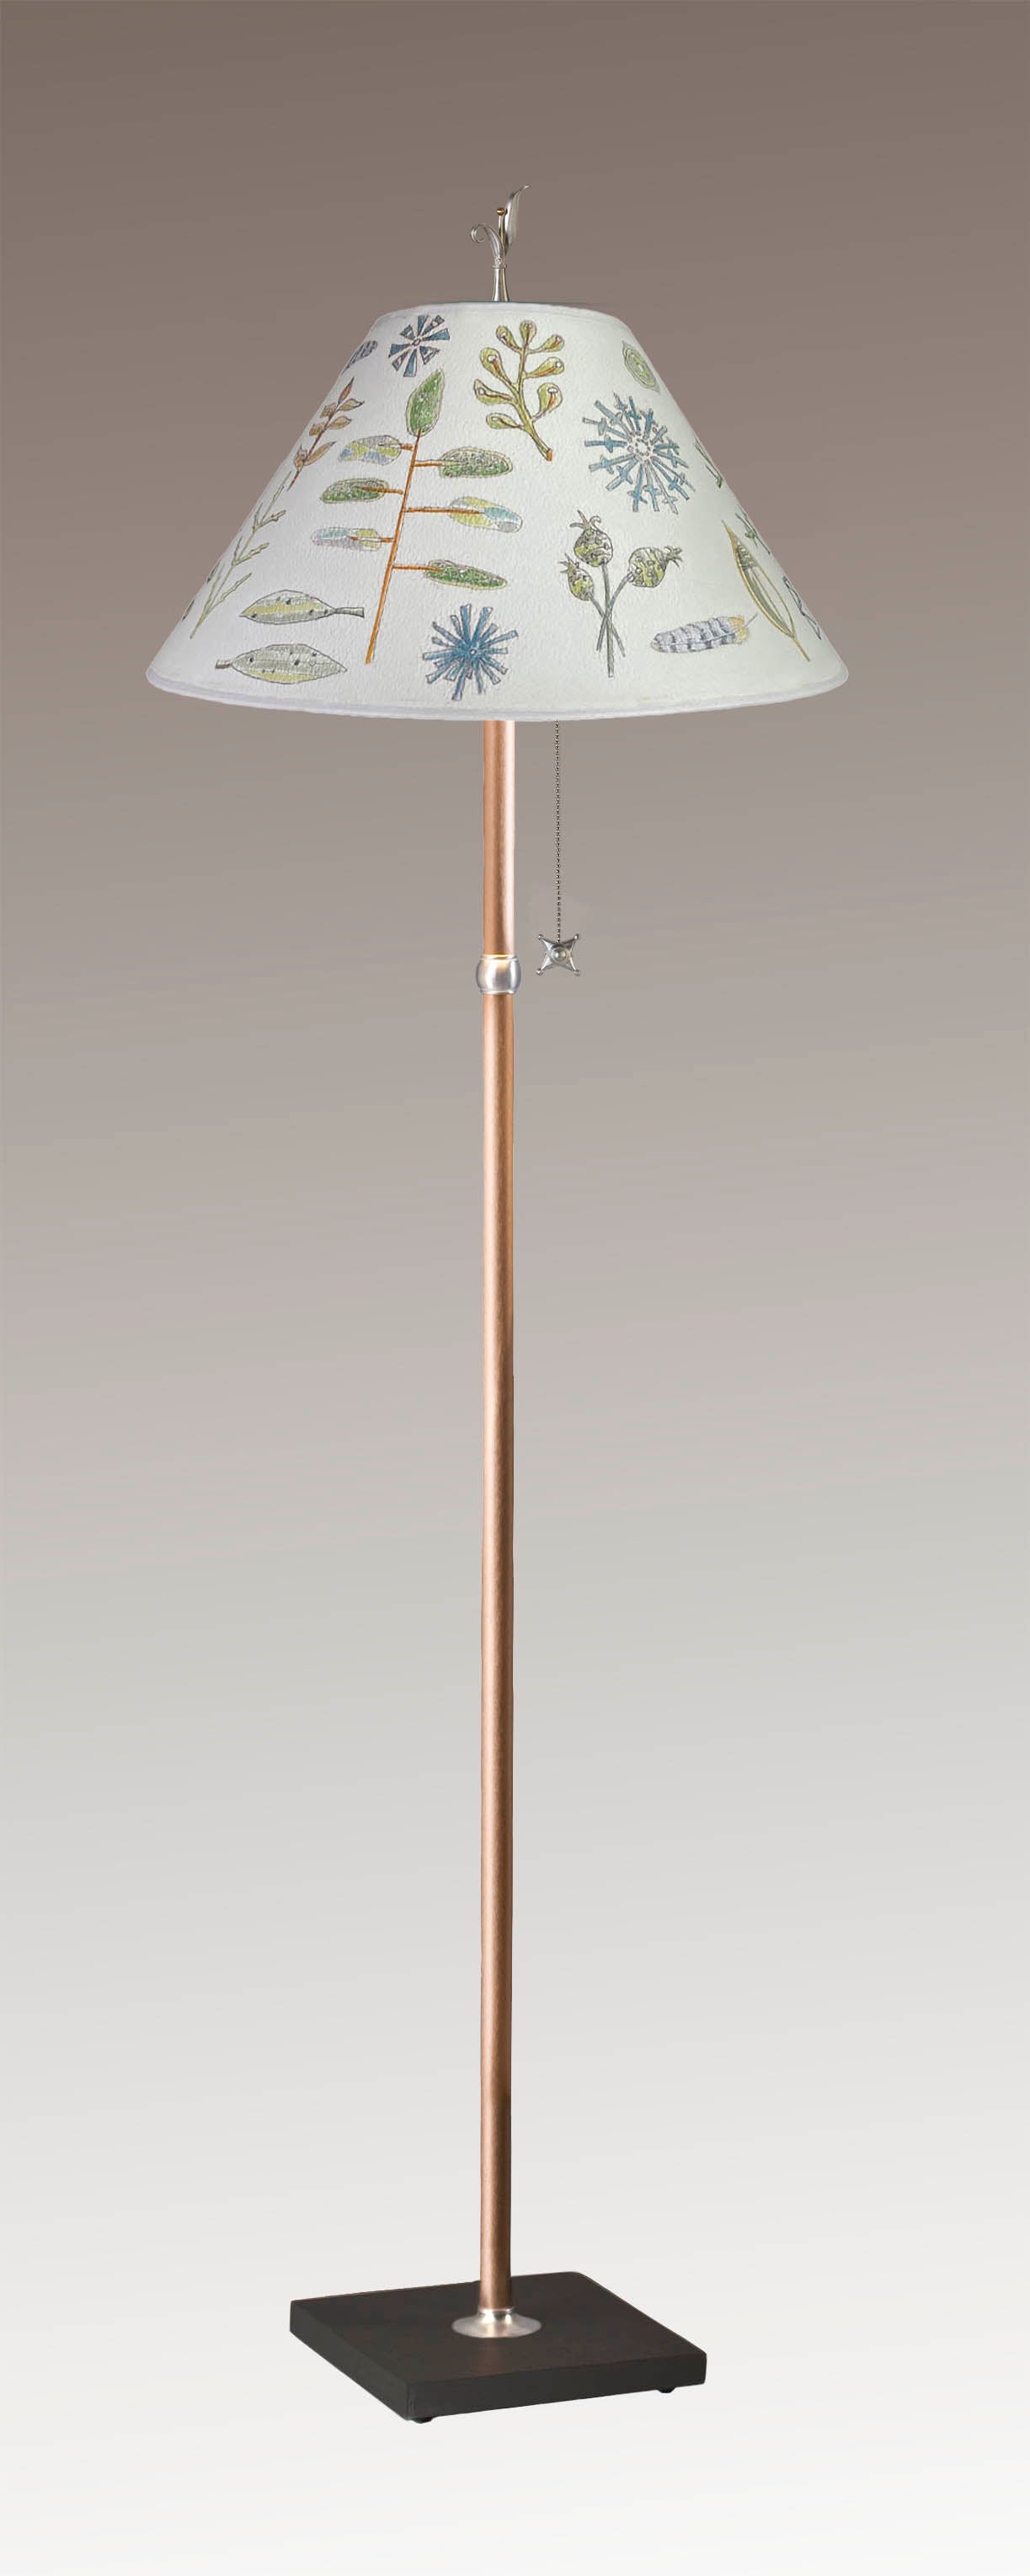 Janna Ugone & Co Floor Lamp Copper Floor Lamp with Large Conical Shade in Field Chart